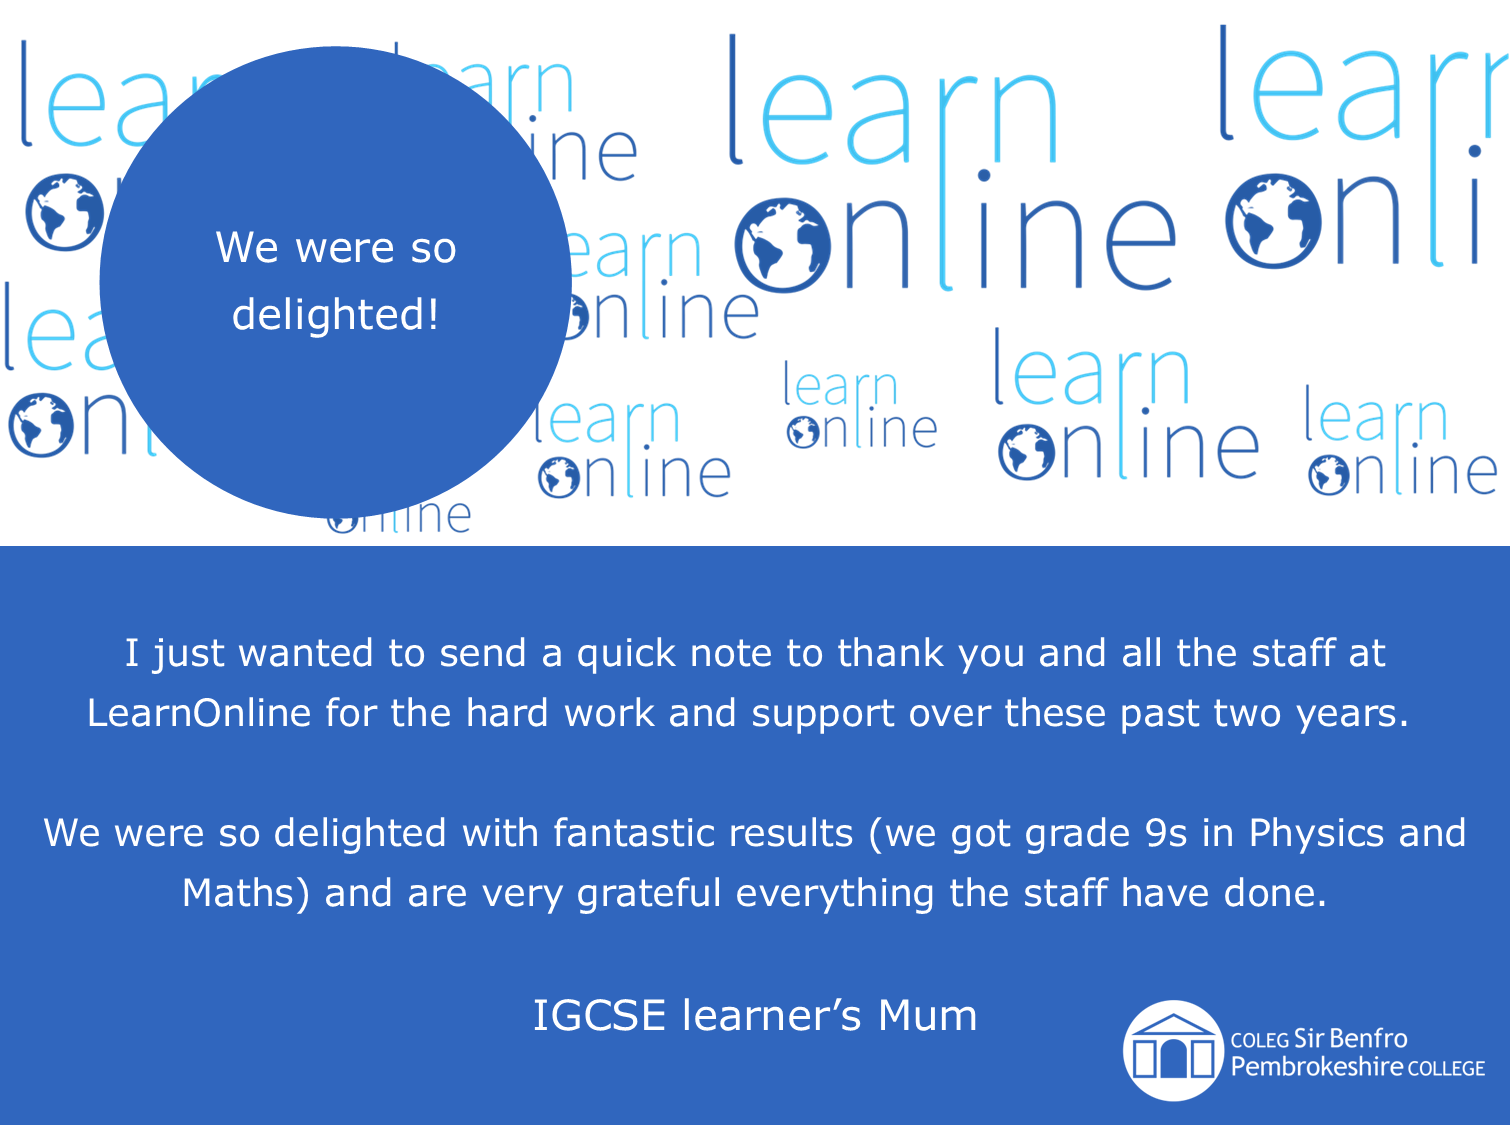 LearnOnline testimonial 'We were so delighted!' I just wanted to send a quick note to thank you and all the staff at LearnOnline for the hard work and support over these past two years.  We were so delighted with fantastic results (we got grade 9s in Physics and Maths) and are very grateful everything the staff have done. IGCSE learner’s Mum